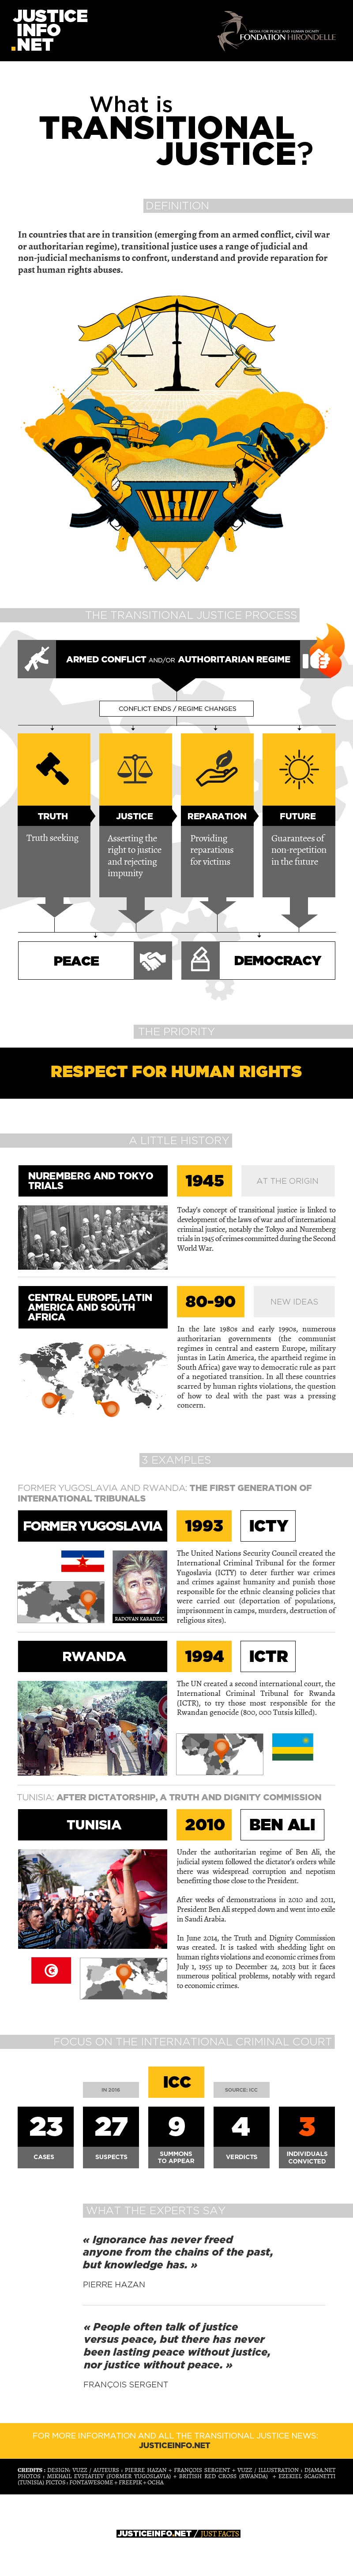 Transitional justice explained (infographic)